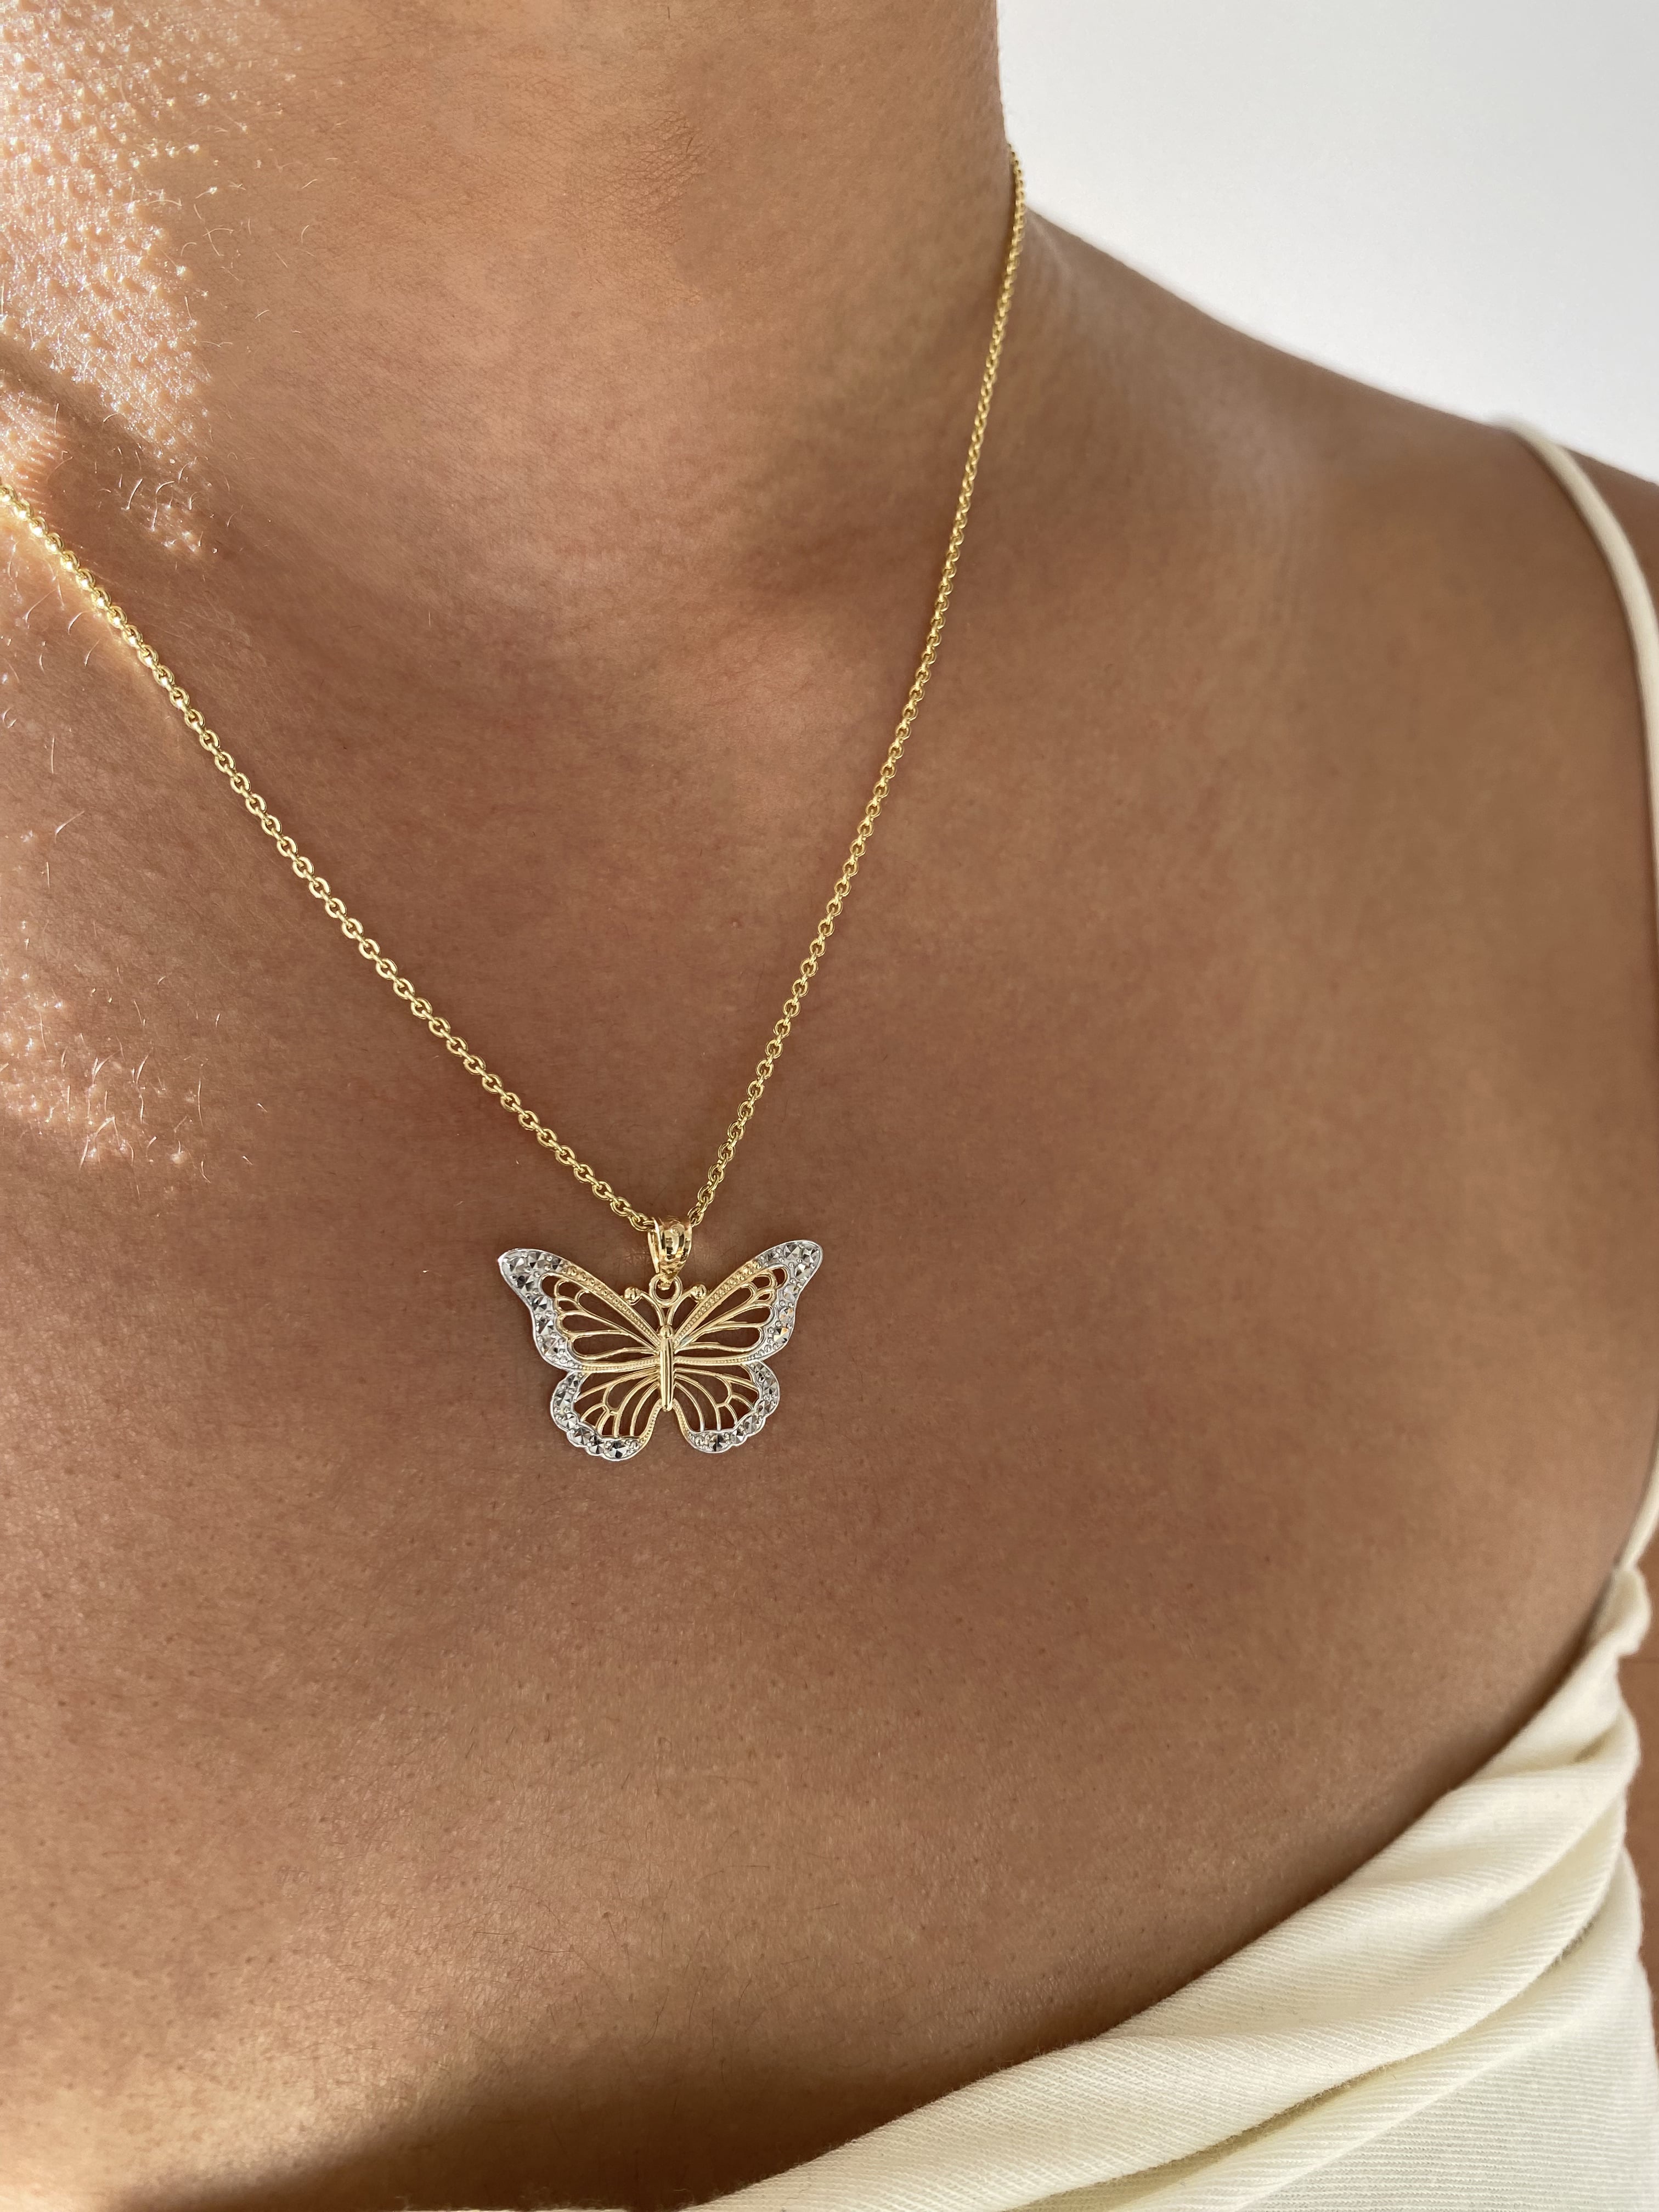 Necklaces : Gold plated steel diamond latter butterfly n ...